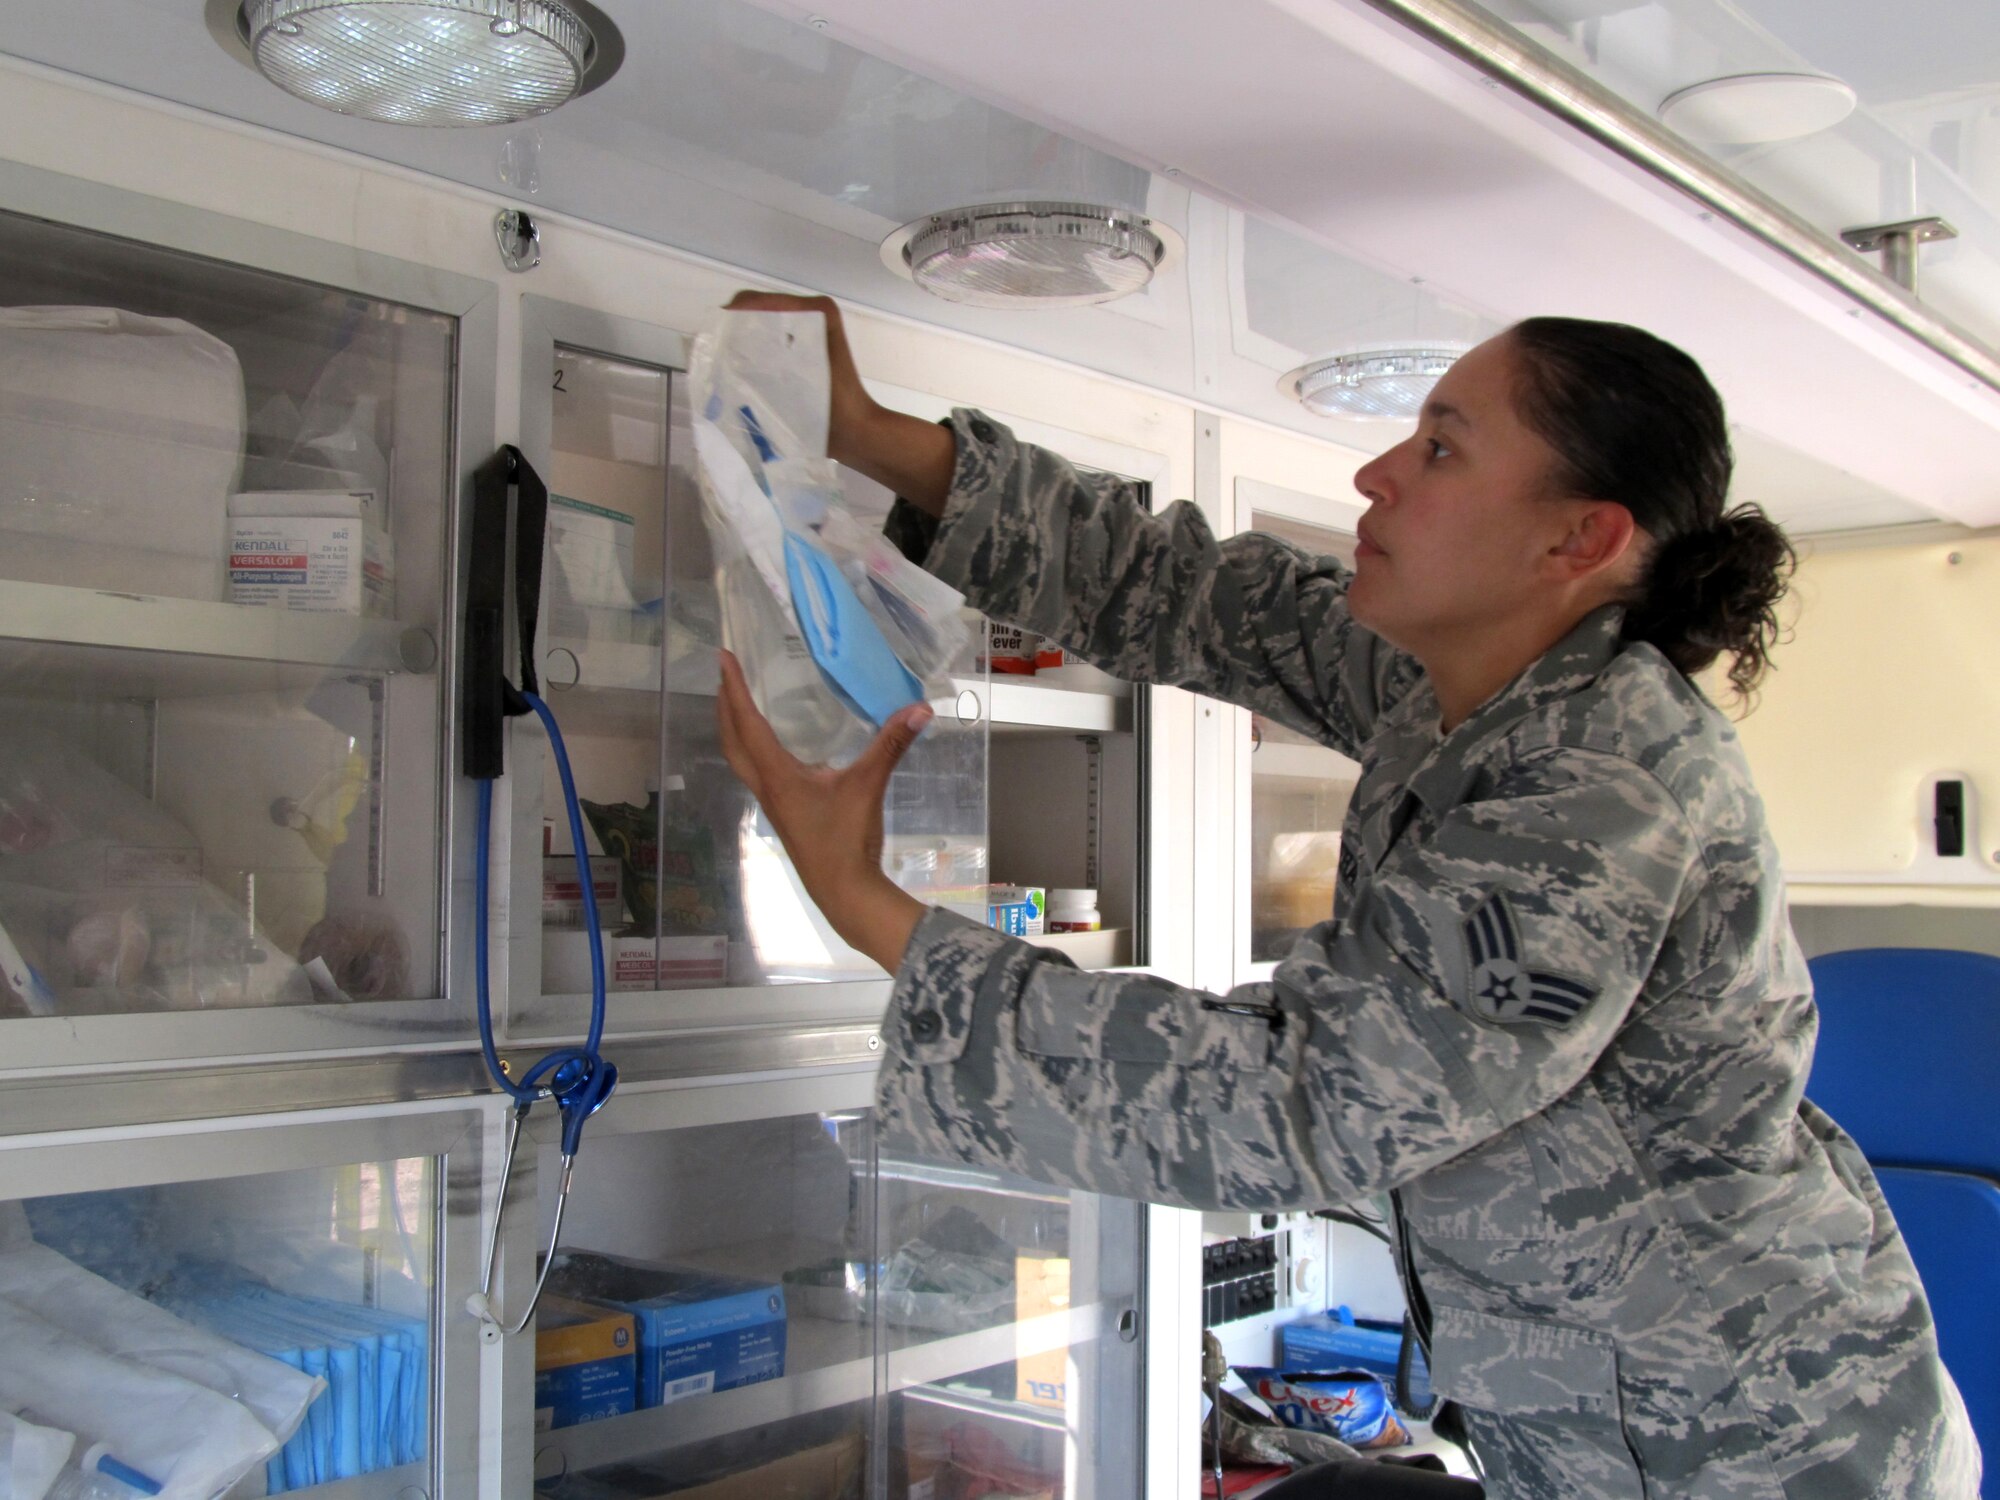 Senior Airman (SrA) Luz Rivera, an aerospace medical technician with the Texas Air National Guard?s 149th Fighter Wing at Lackland Air Force Base, Texas, prepares an ambulance before training operations begin at the Texas Air National Guard?s 204th Security Forces Squadron at Fort Bliss, Texas; Sept. 13, 2011. (Air National Guard photo by Staff Sgt. Phil Fountain/Released)